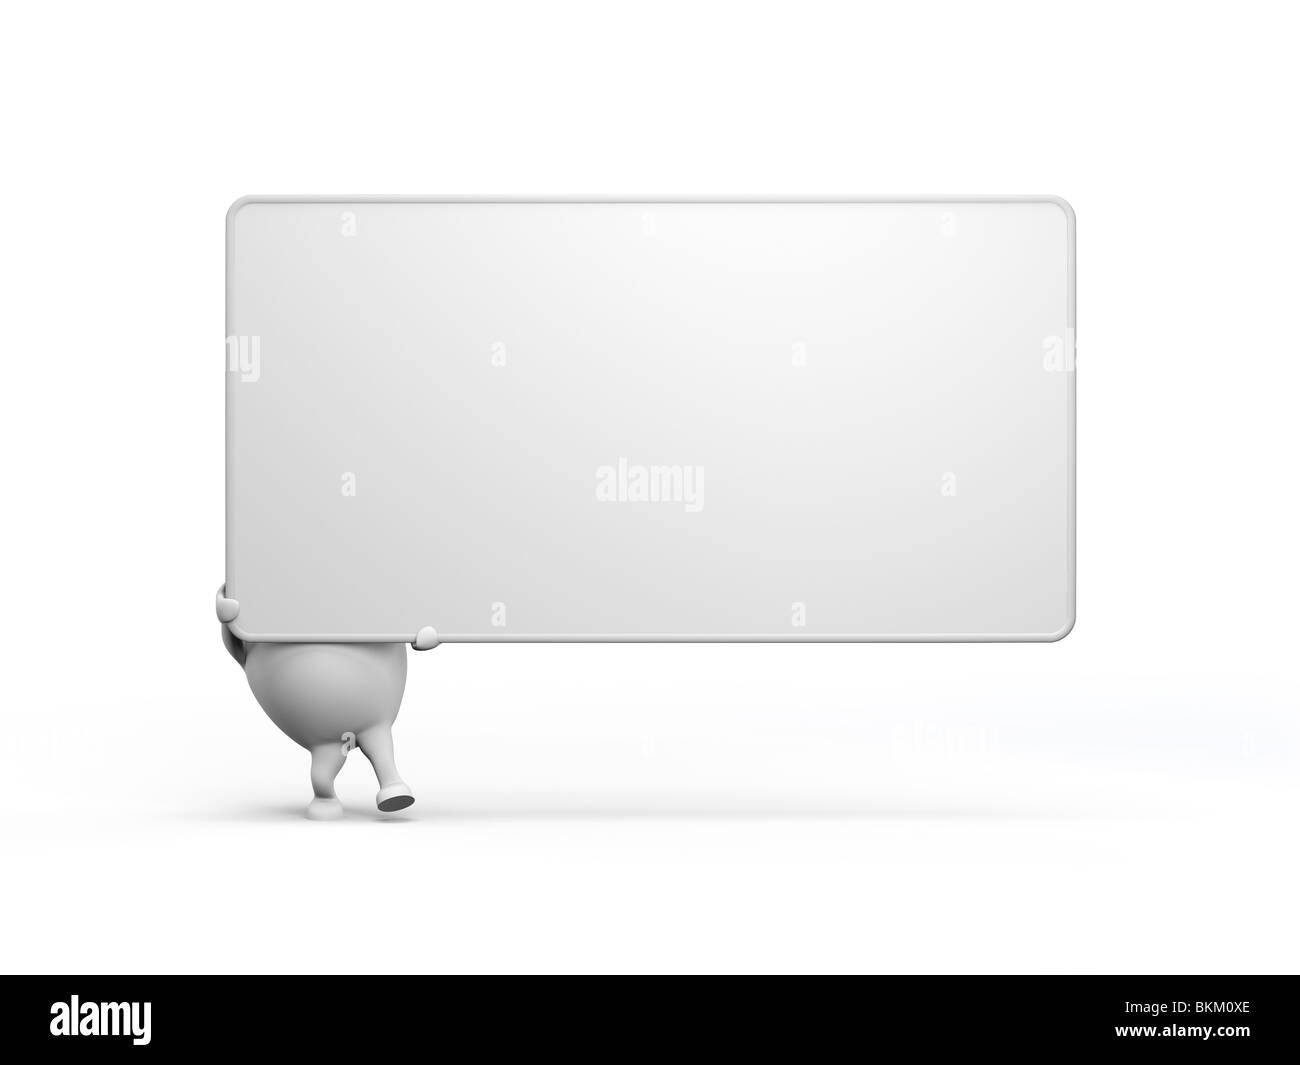 3D illustration of a cartoon character holding a large blank sign. Isolated on white background. Stock Photo